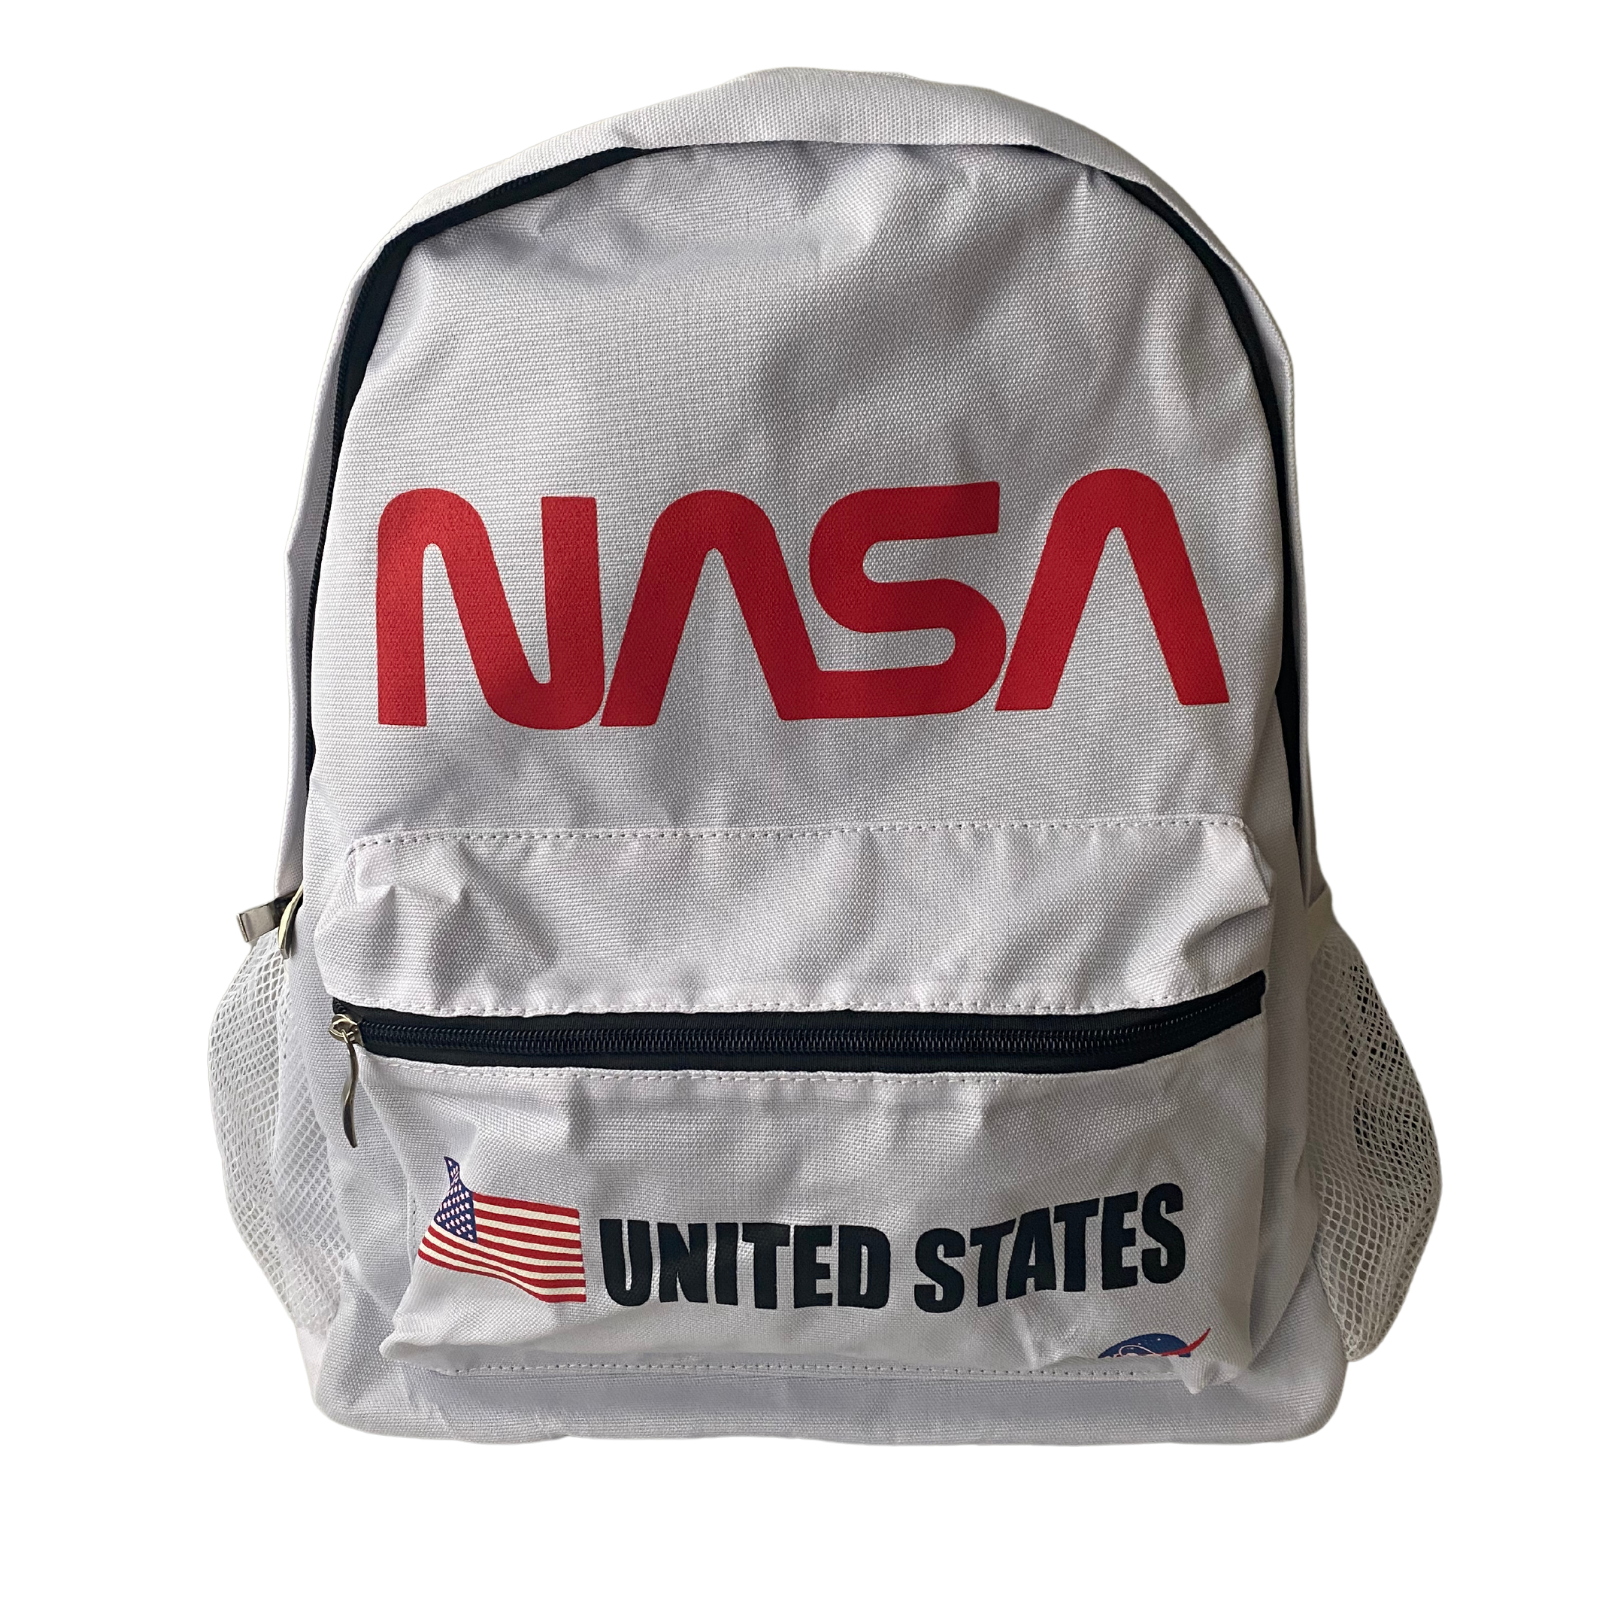 NASA Worm Logo Backpack with Flag and United States